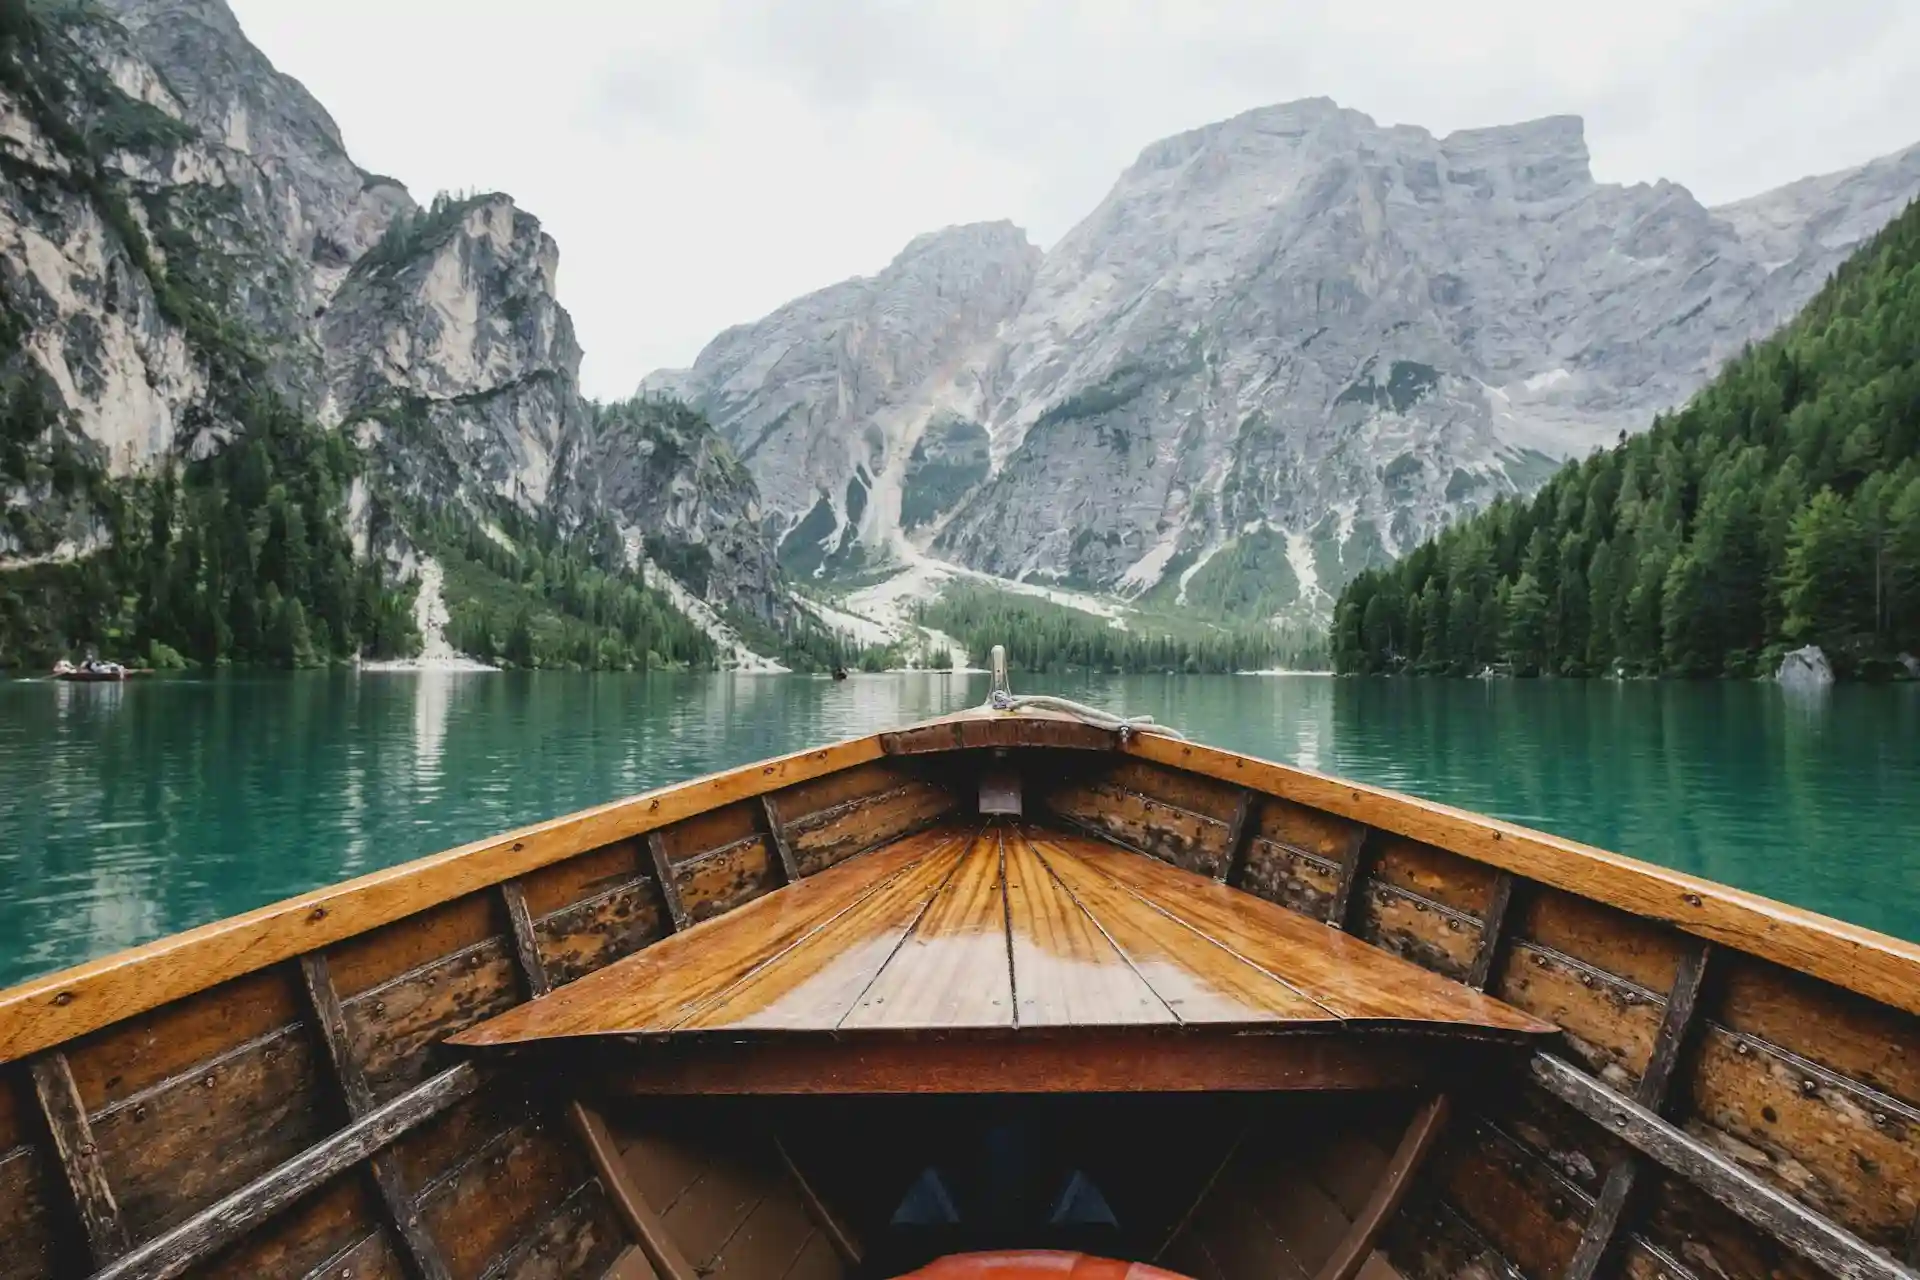 Boat on a lake with green water against the background of mountains